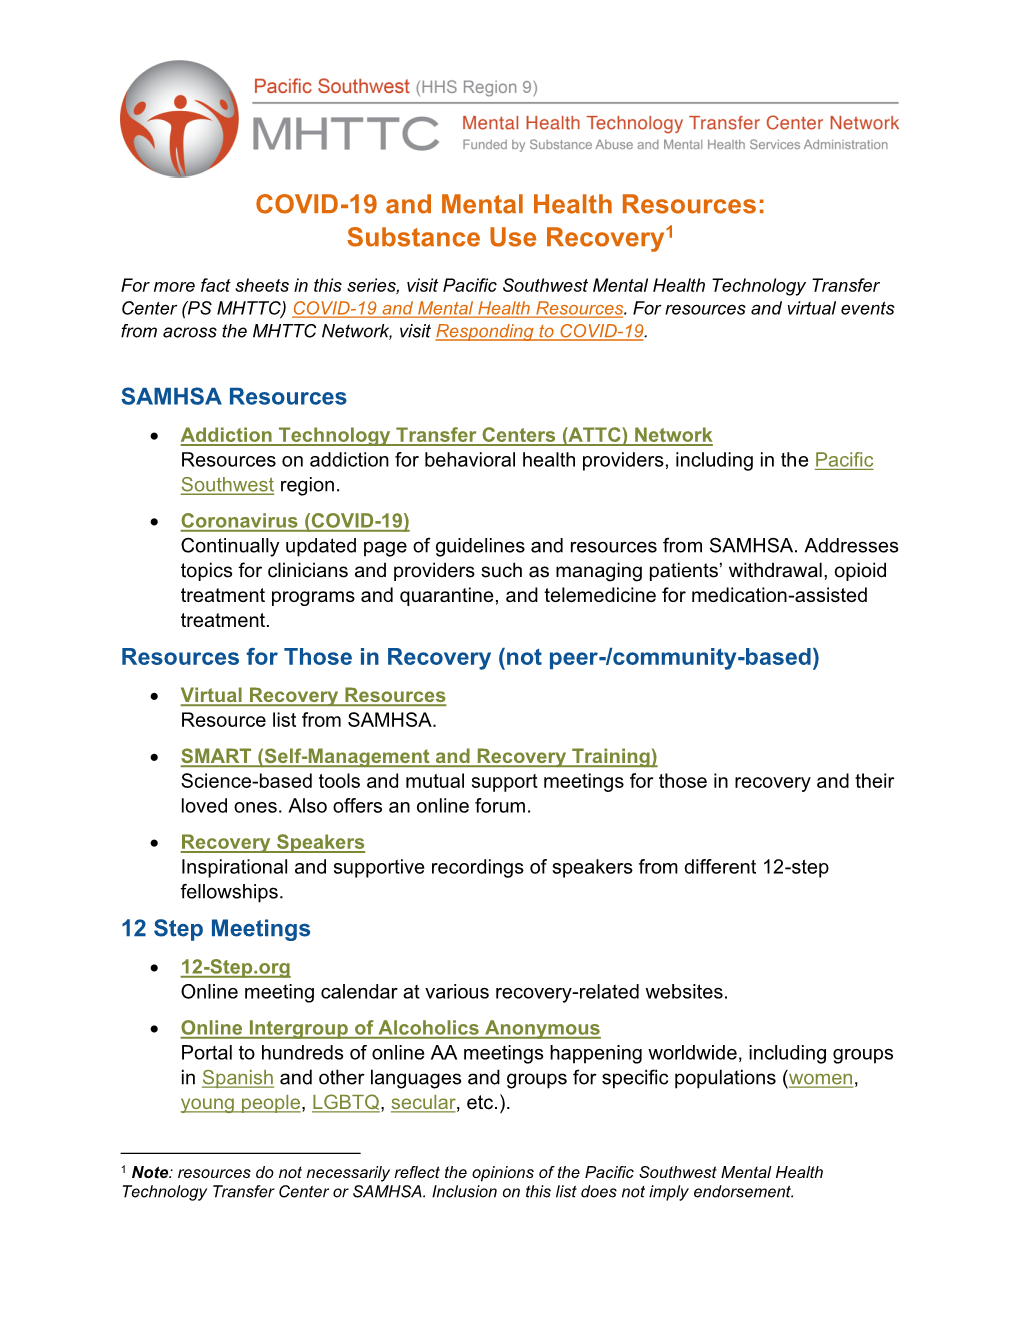 COVID-19 and Mental Health Resources: Substance Use Recovery1